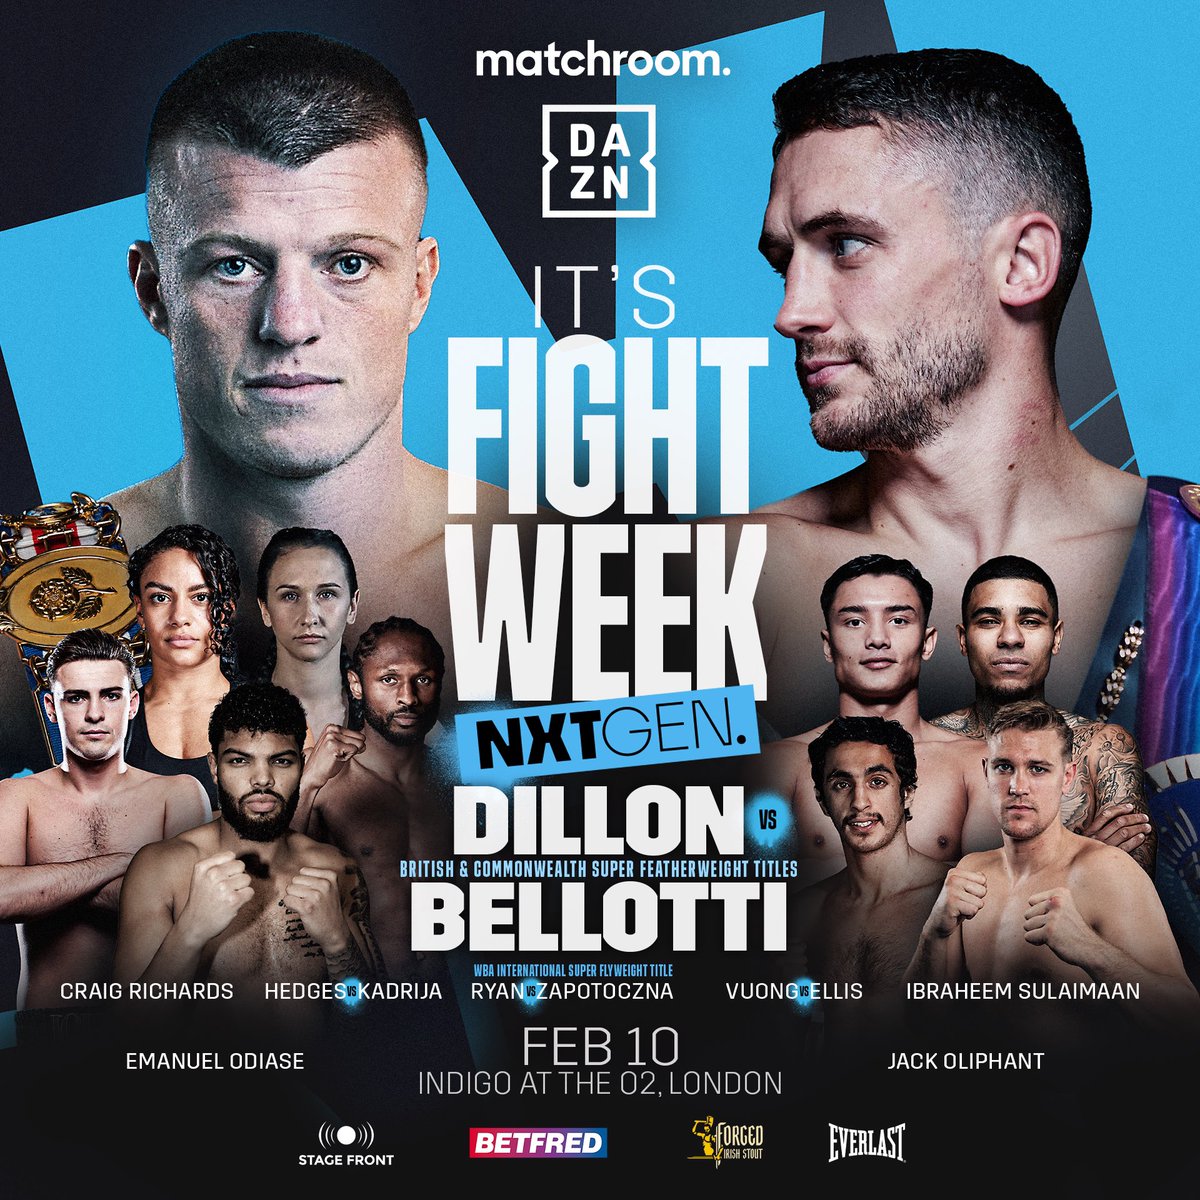 Fight week on @DAZNBoxing for the Nxt Gen show Craig Richards is going to show why he's Next Gen 👊🏻😉#DillonBellotti